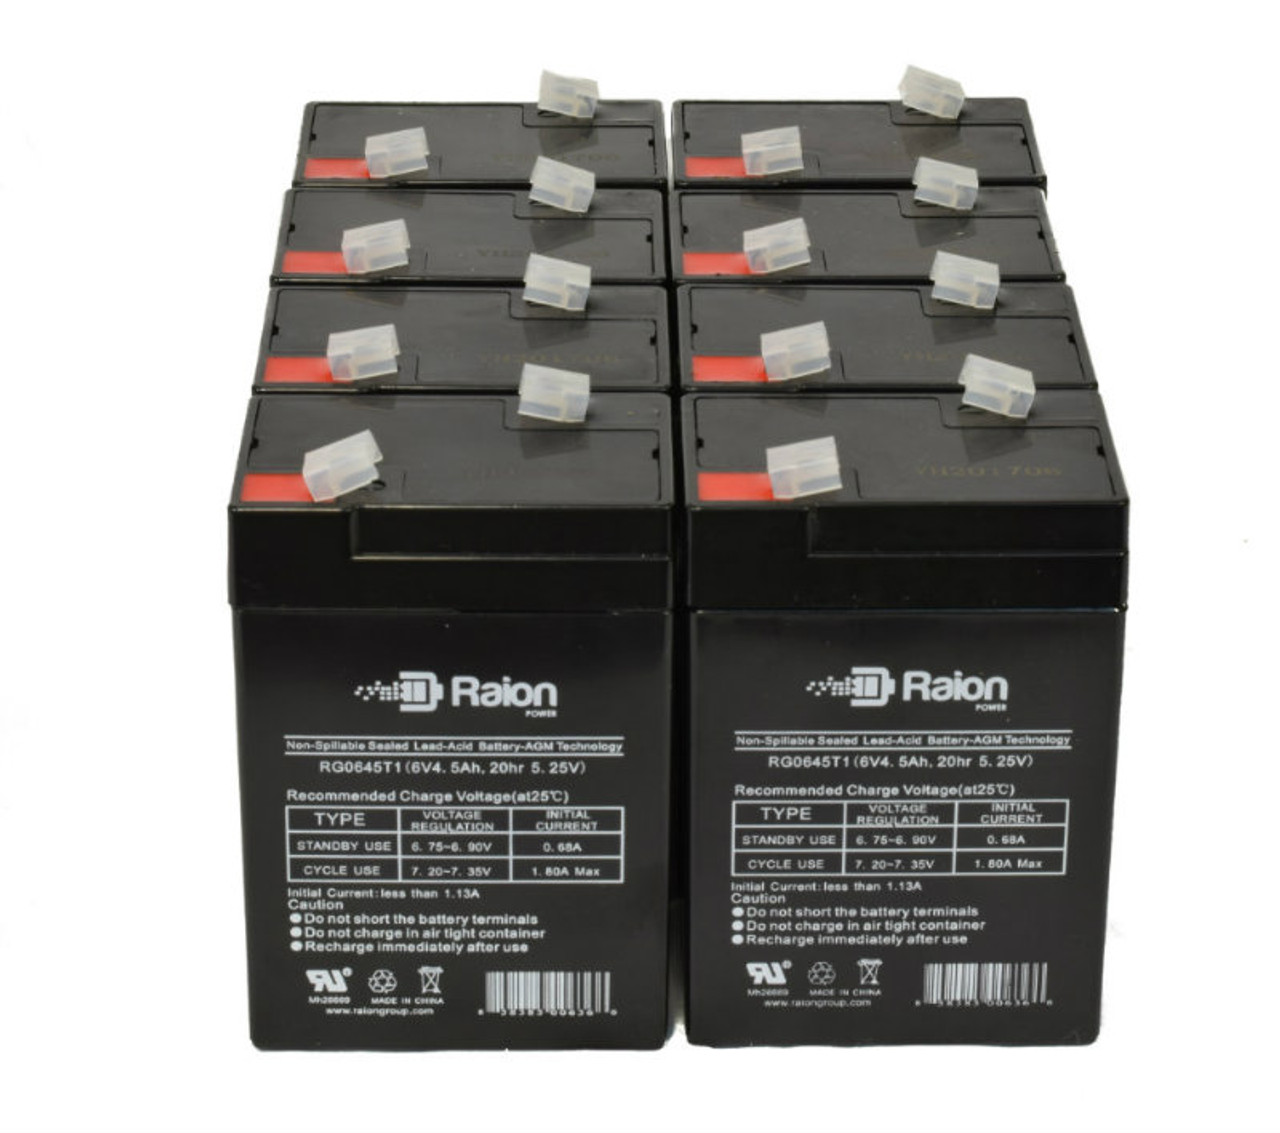 Raion Power RG0645T1 6V 4.5Ah Replacement Medical Equipment Battery for Arjo-Century SARA Plus Standing Aid - 8 Pack